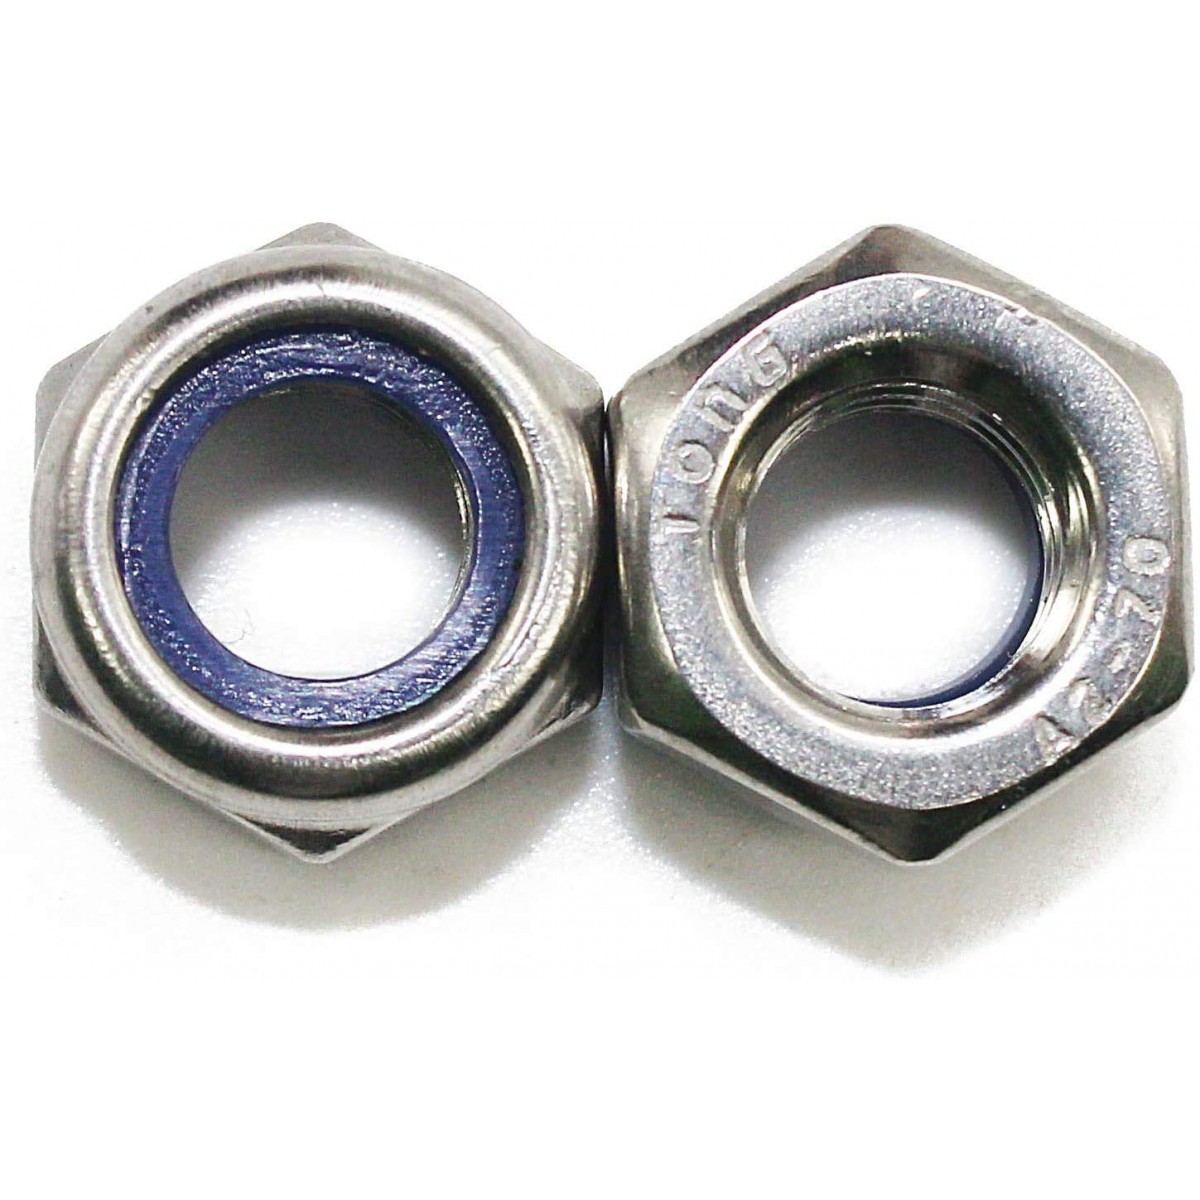 20 M8-1.25 Metric Coarse Thread Lock Nut 8mm Nuts With 13 Hex nylock nuts 8mm 